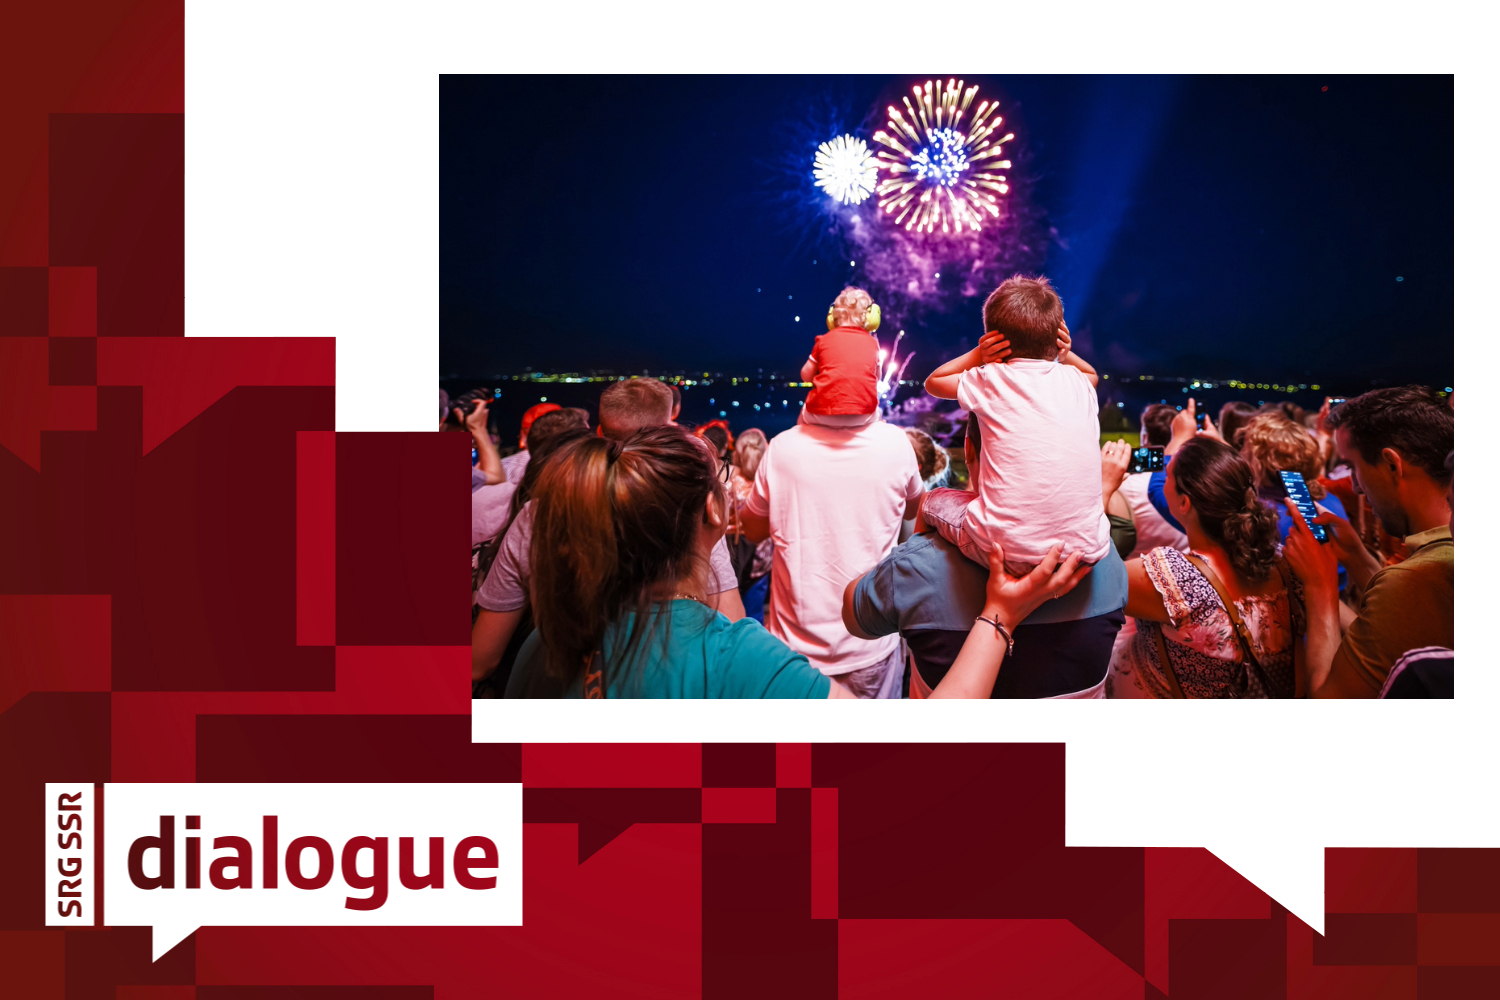 People watch the fireworks during the Swiss National Day celebrations in Nyon on Monday 1 August 2022.